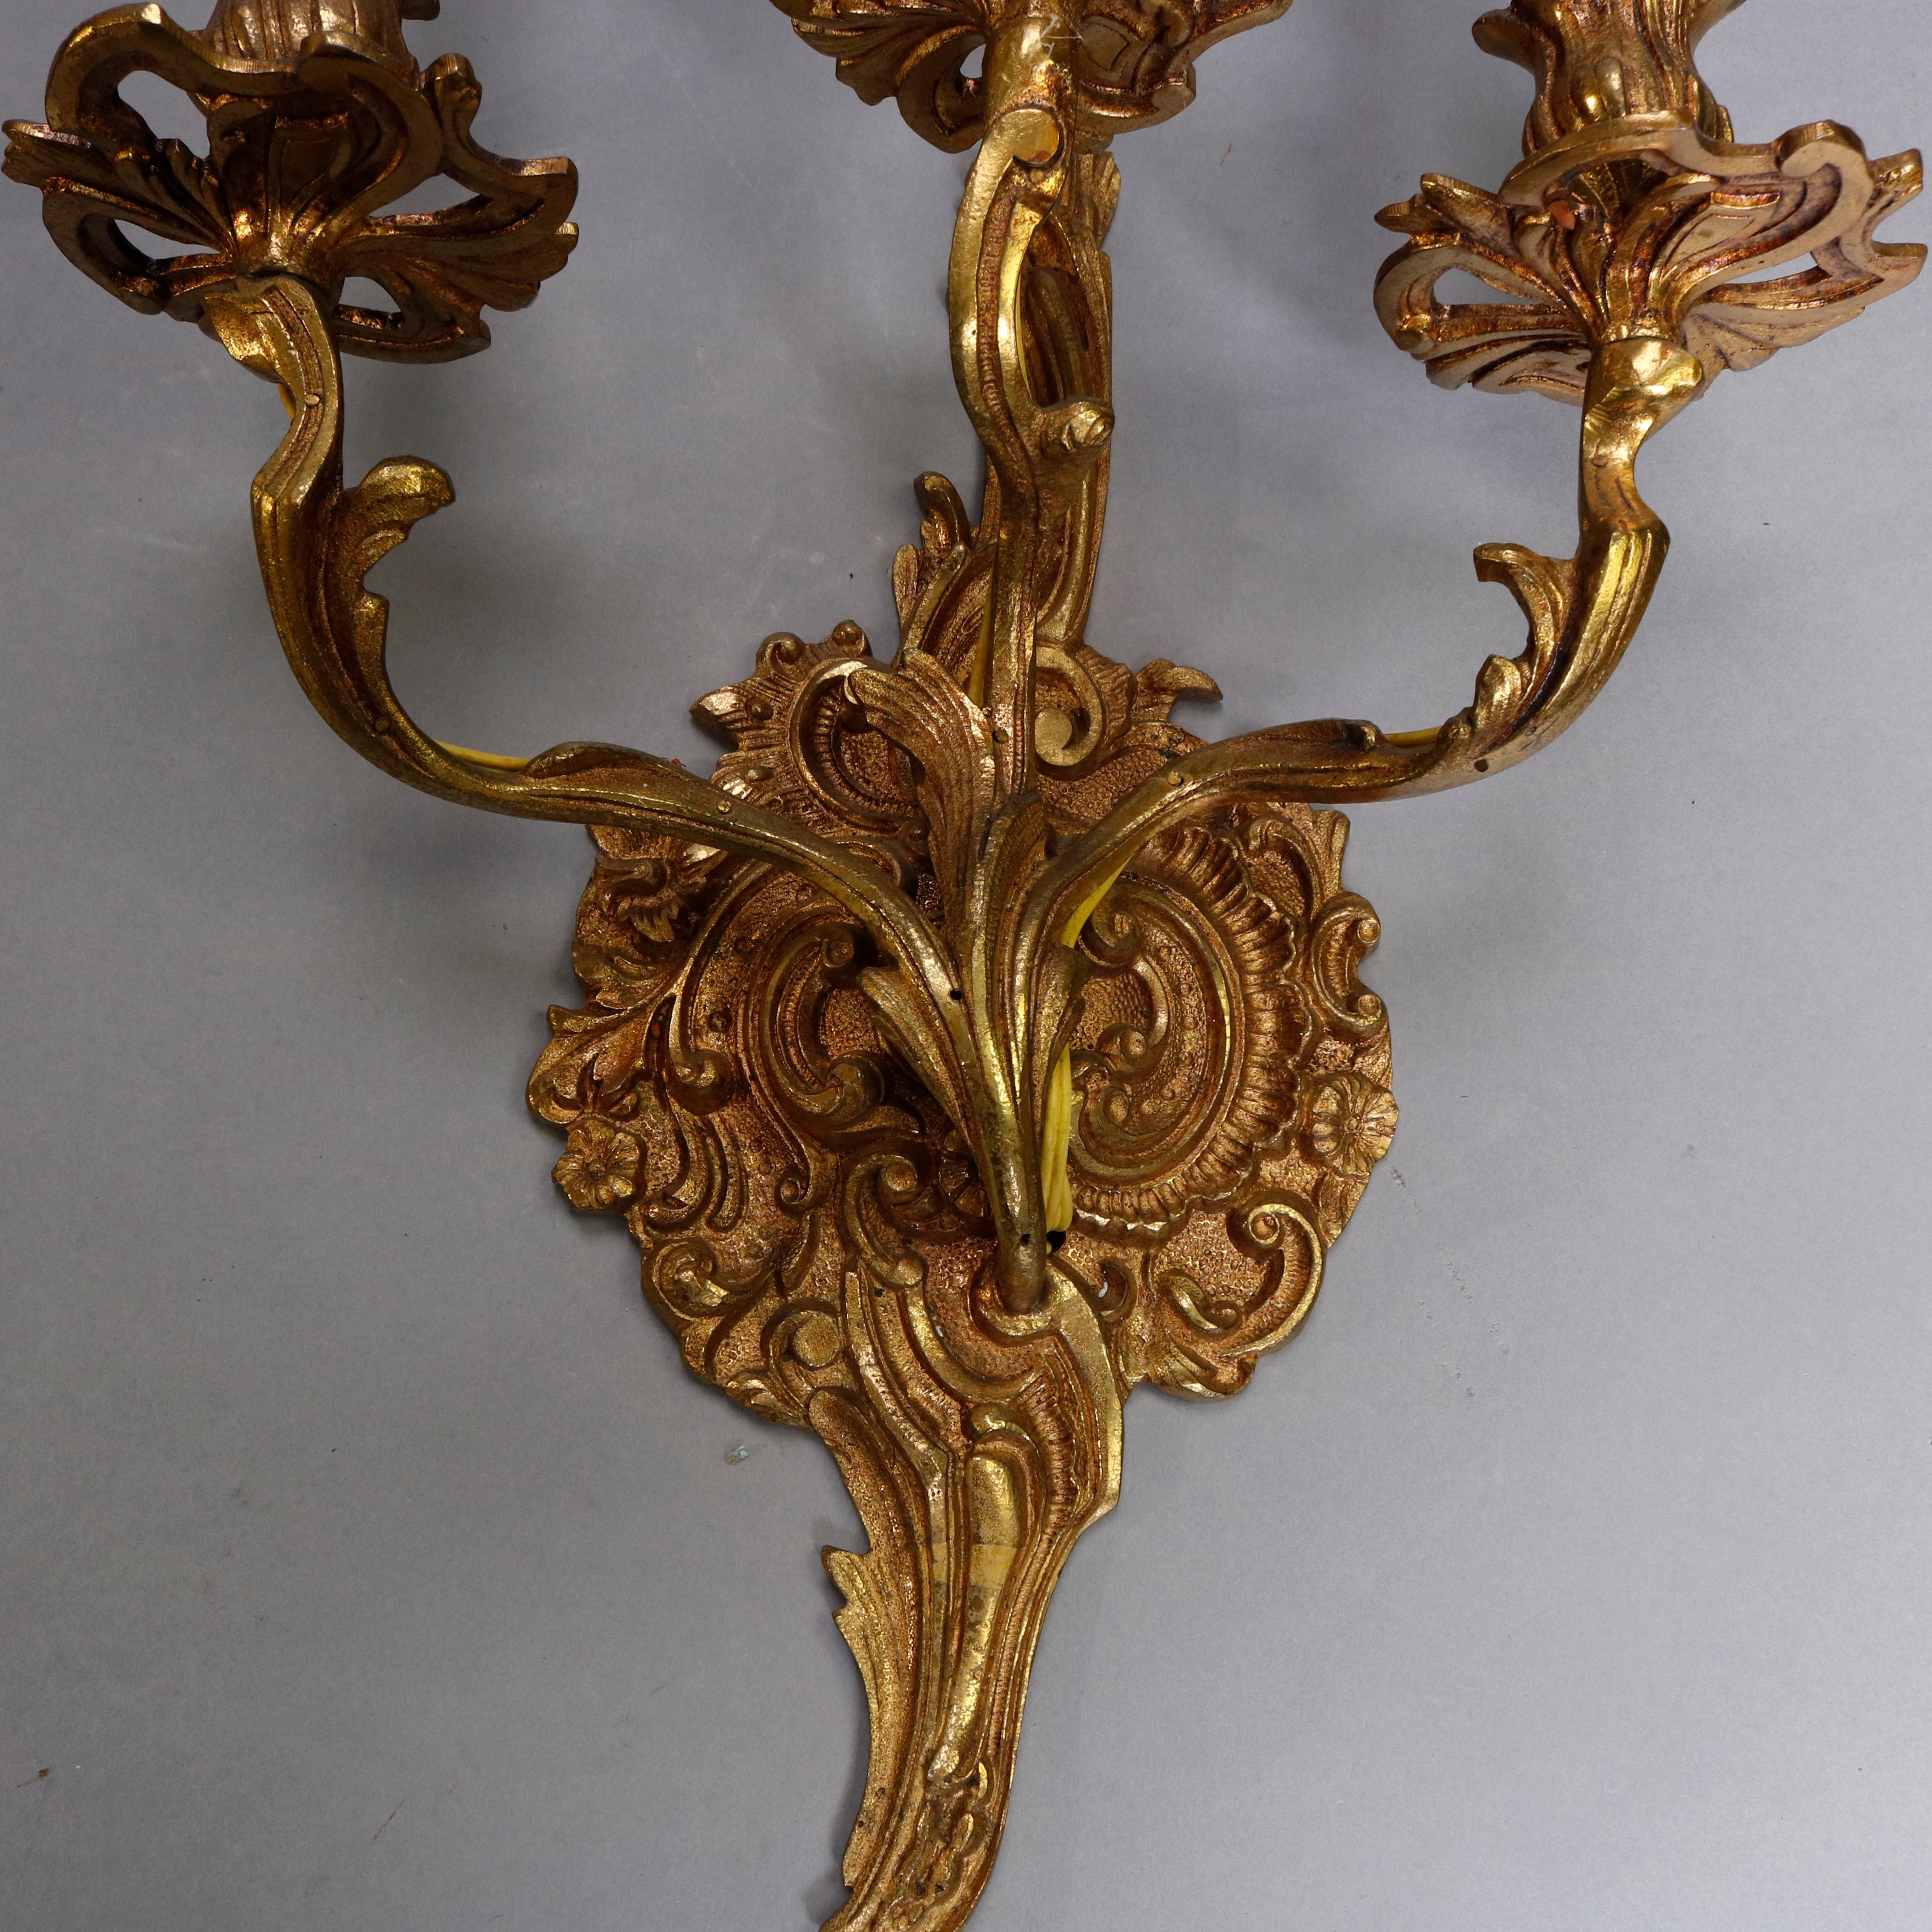 An antique pair of French wall sconces offer gilt cast bronze foliate form each with three candle or light sockets, configured for electric, circa 1880

***DELIVERY NOTICE – Due to COVID-19 we are employing NO-CONTACT PRACTICES in the transfer of